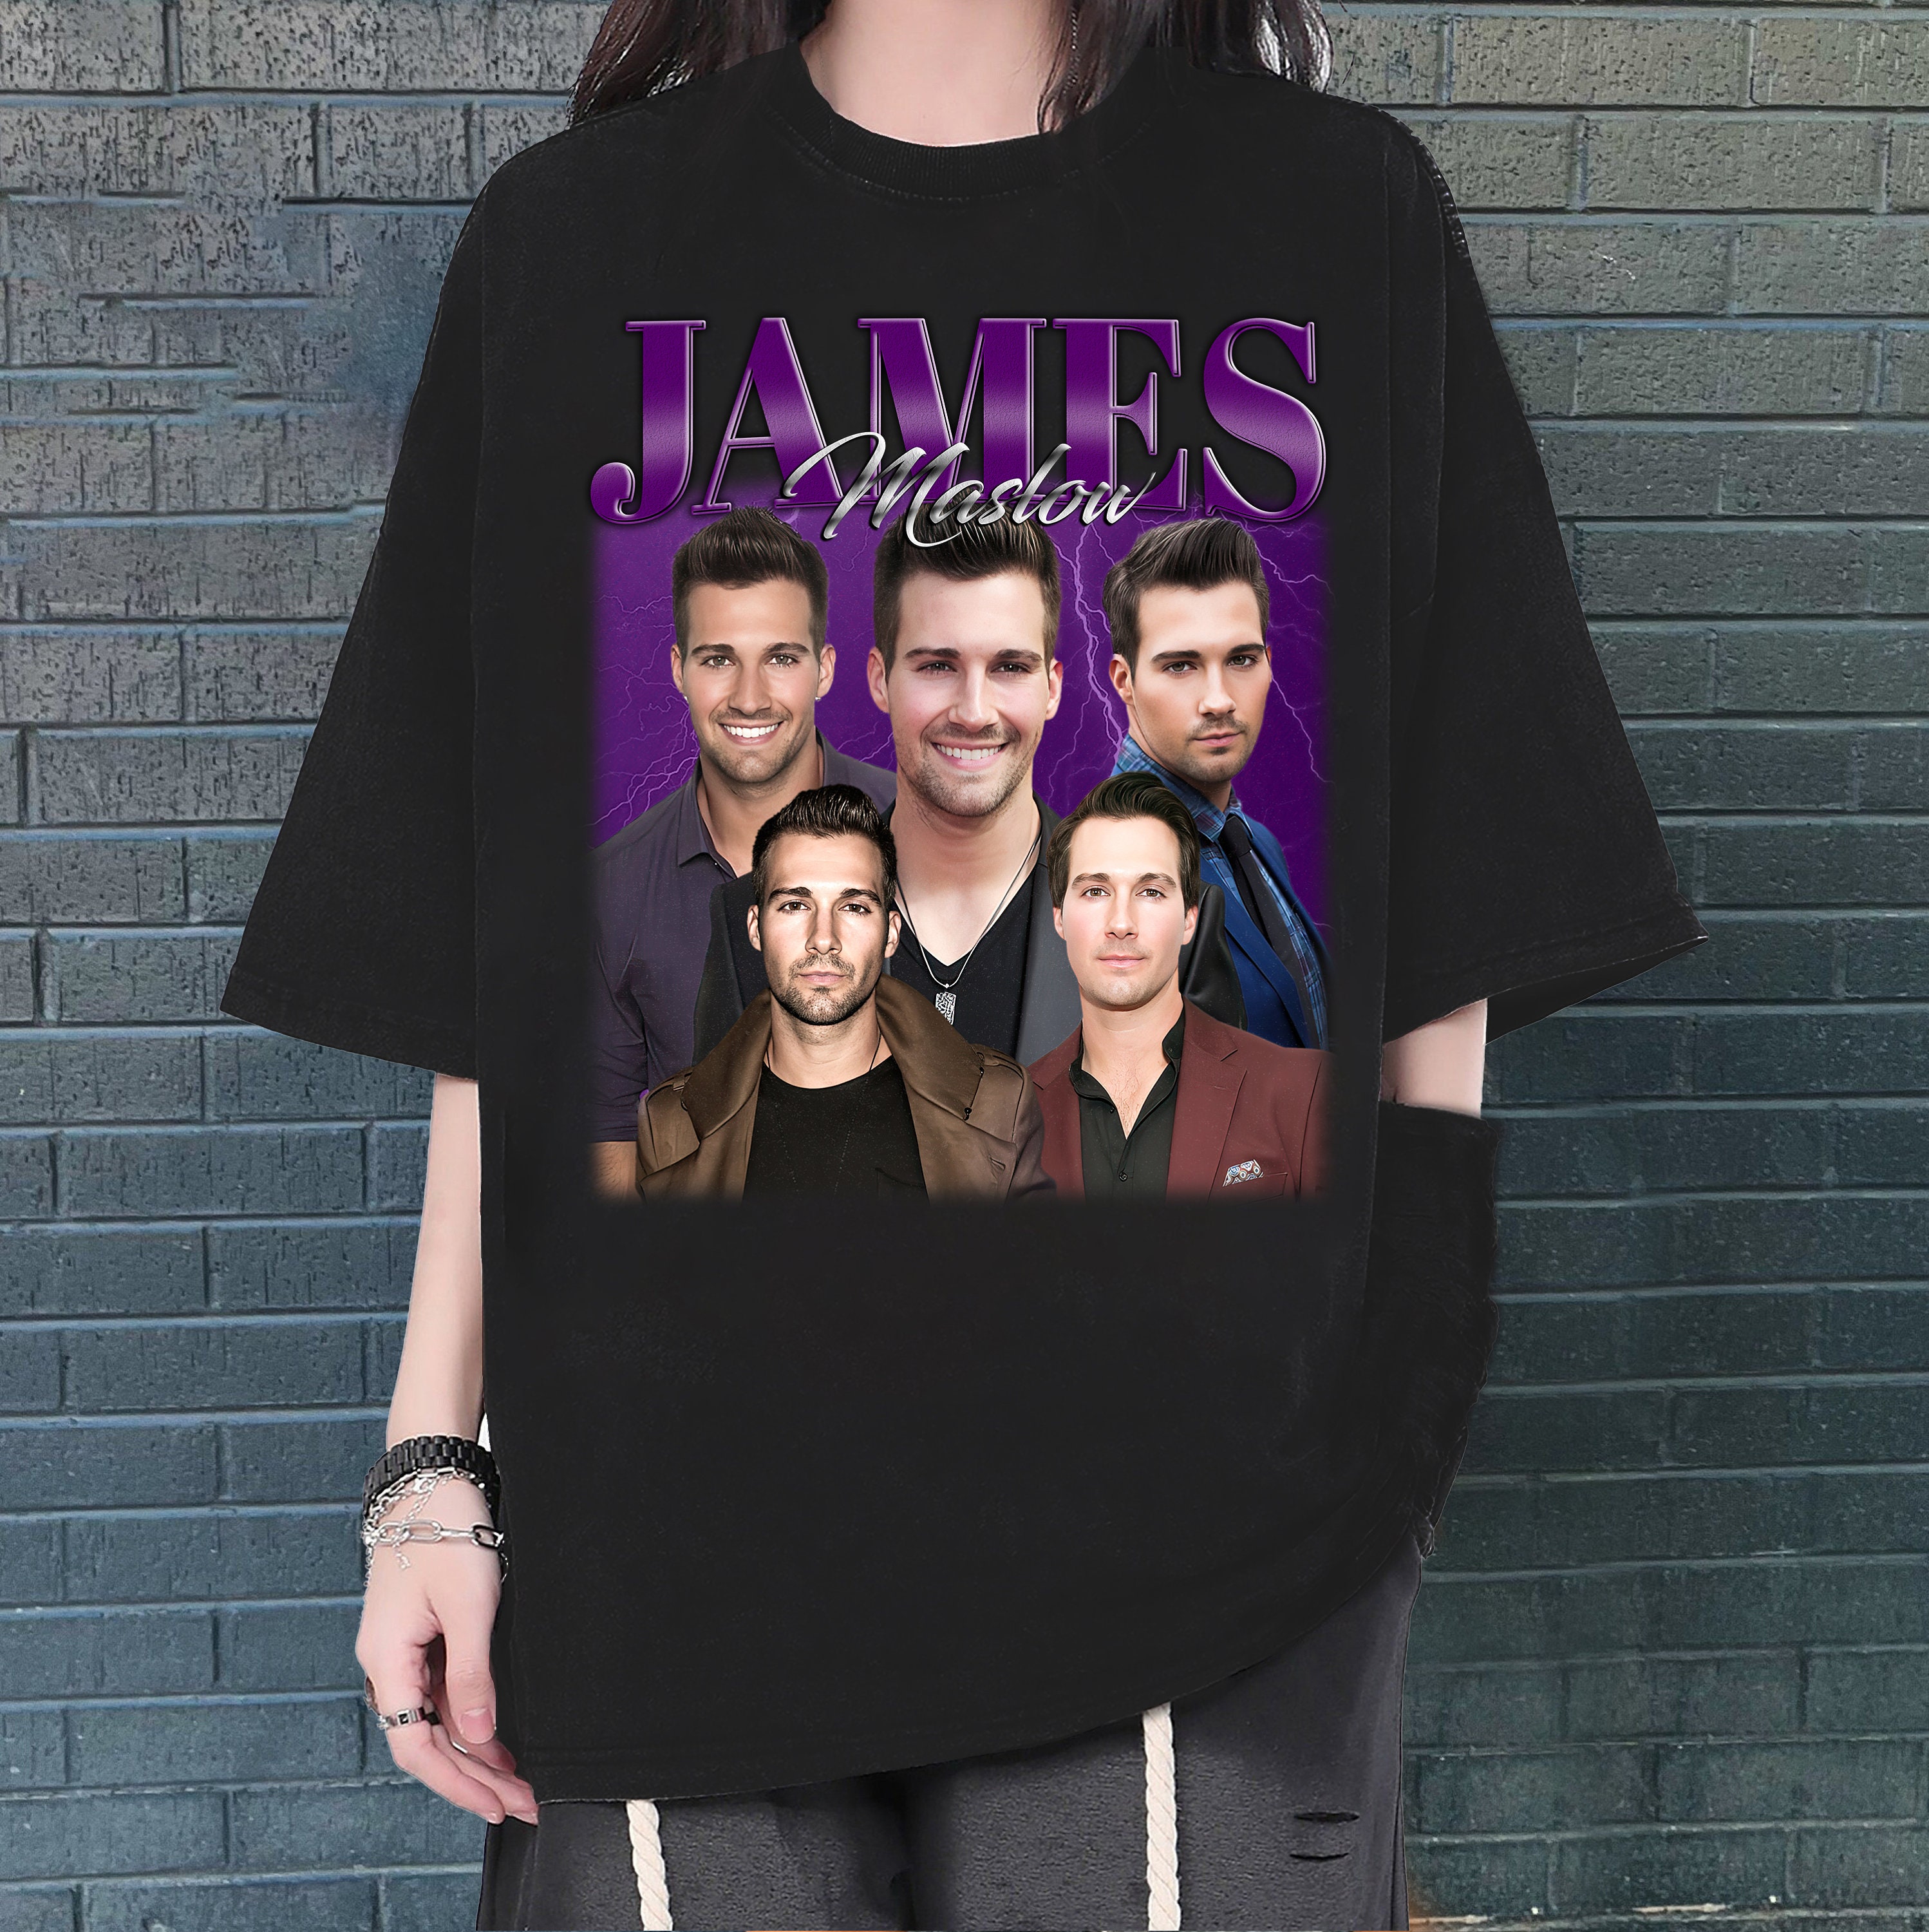 James Maslow Big Time Rush Forever Tour T Shirt - Teeholly